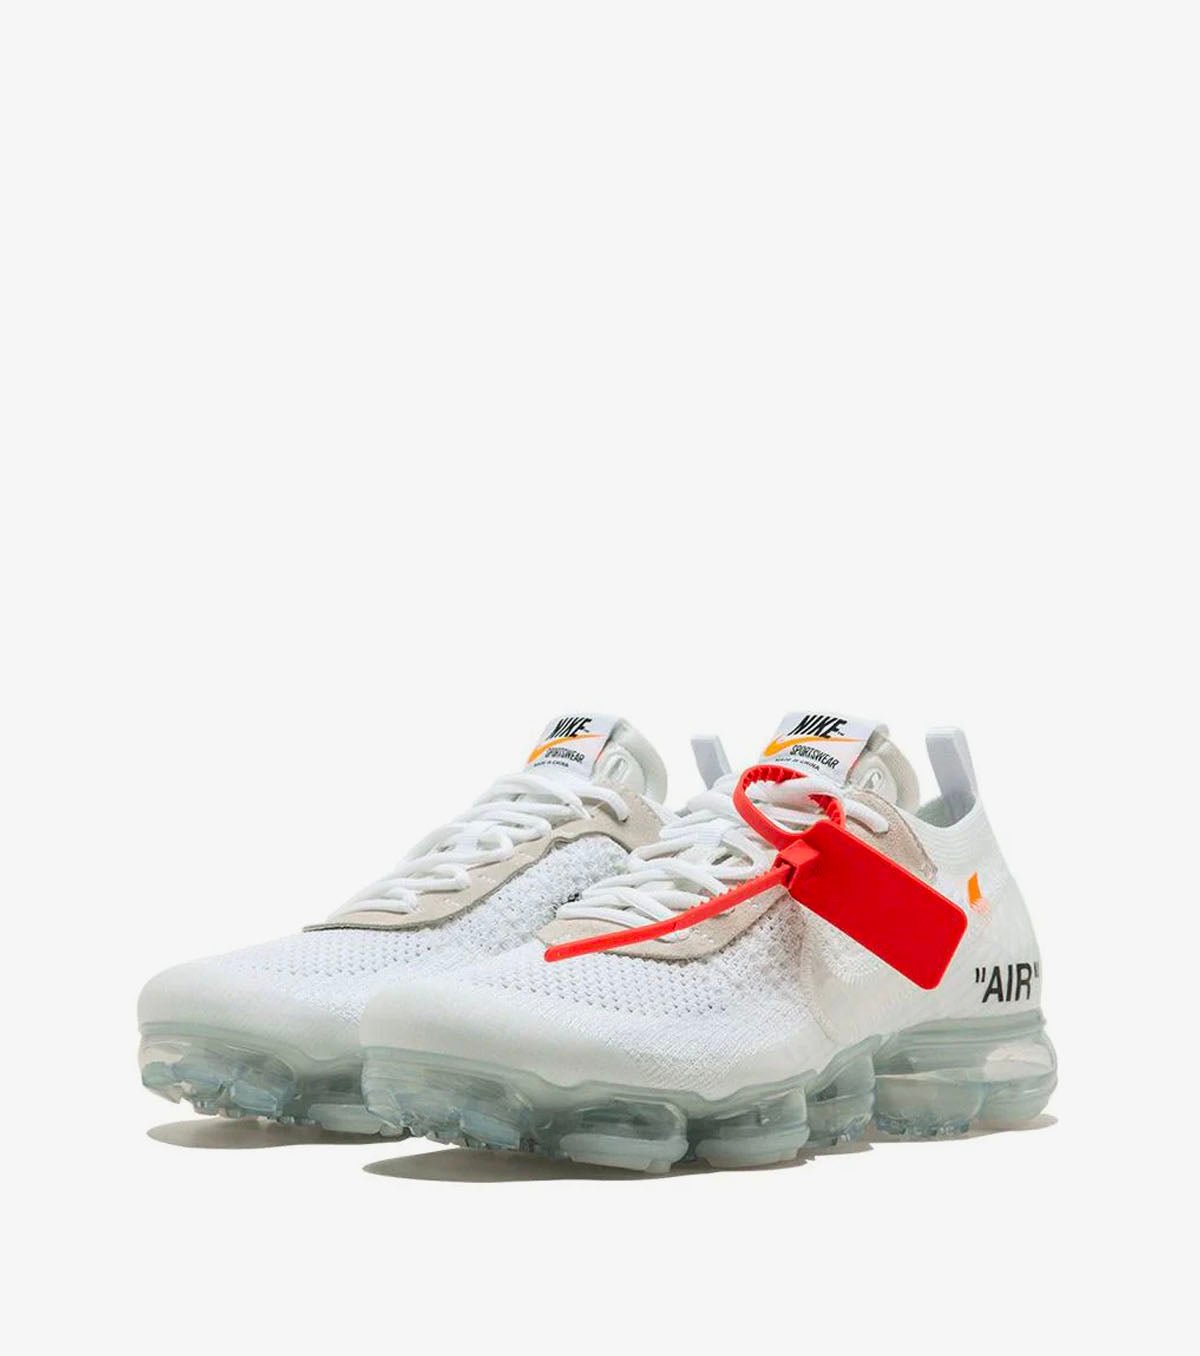 Off-White X Air Vapormax Flyknit - SNKRBASE